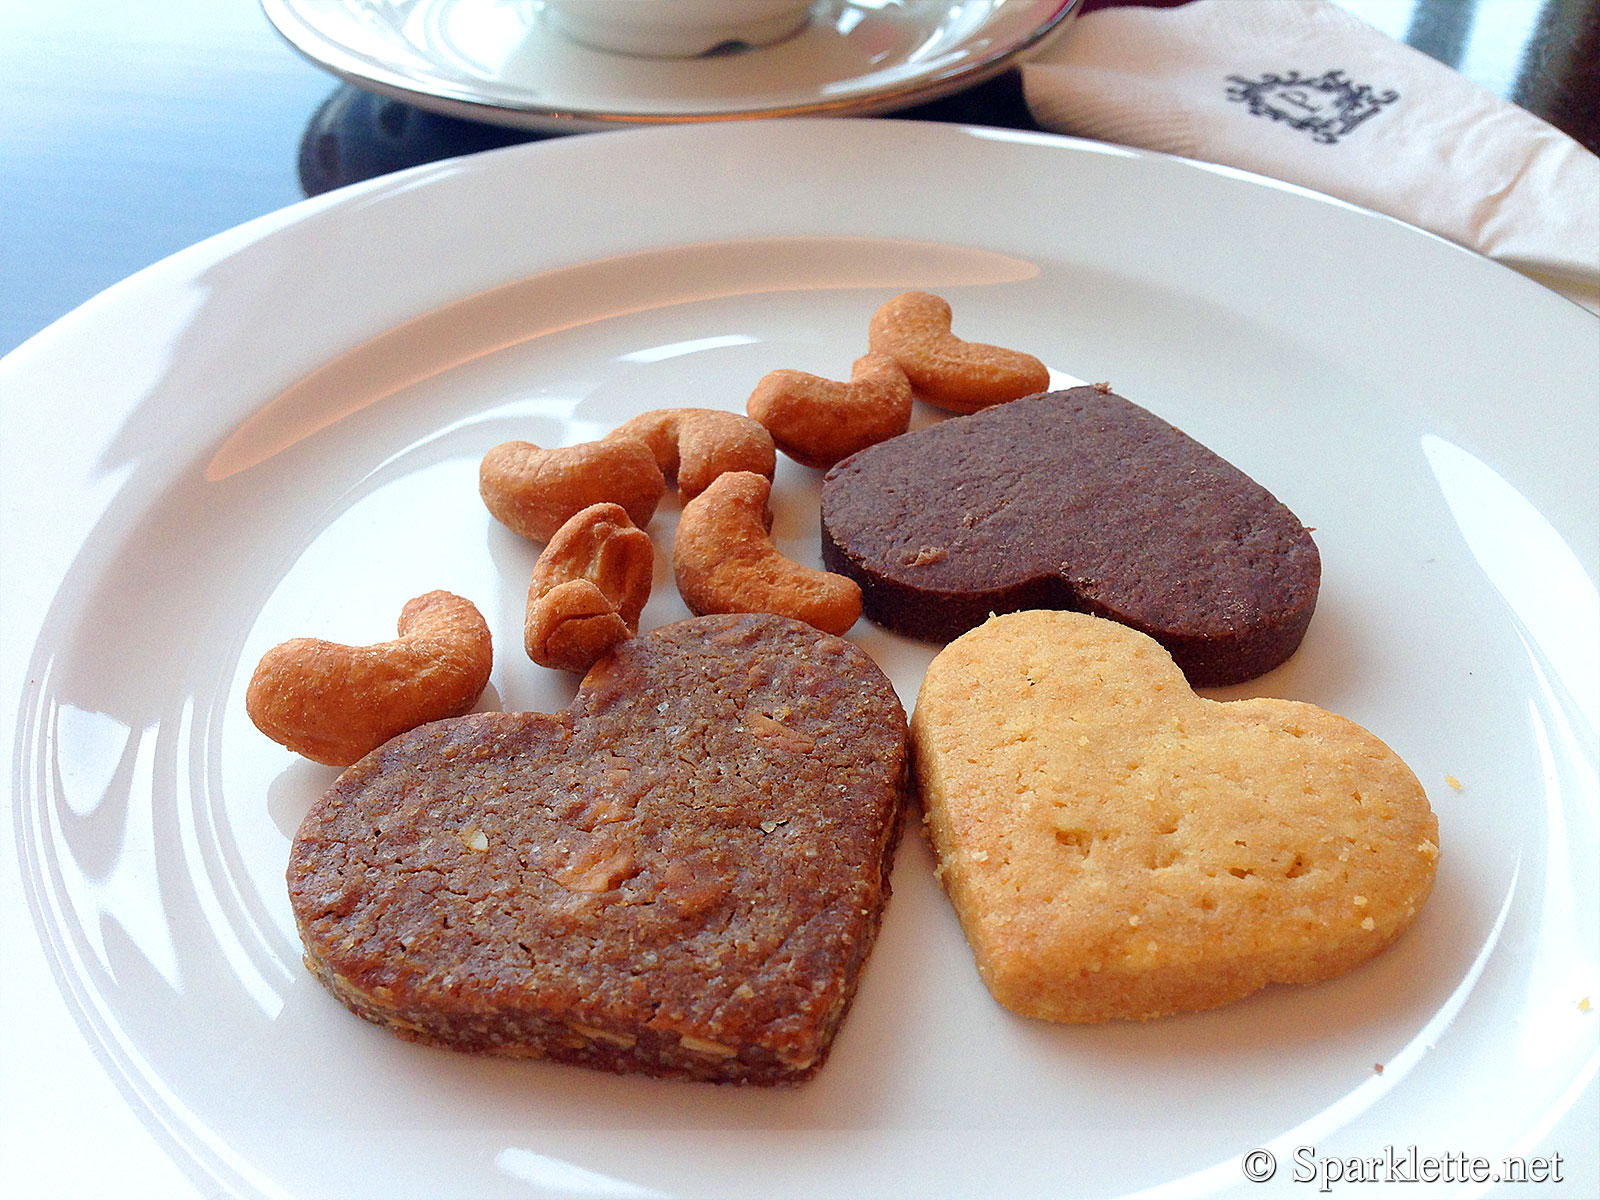 Heart-shaped cookies and cashew nuts